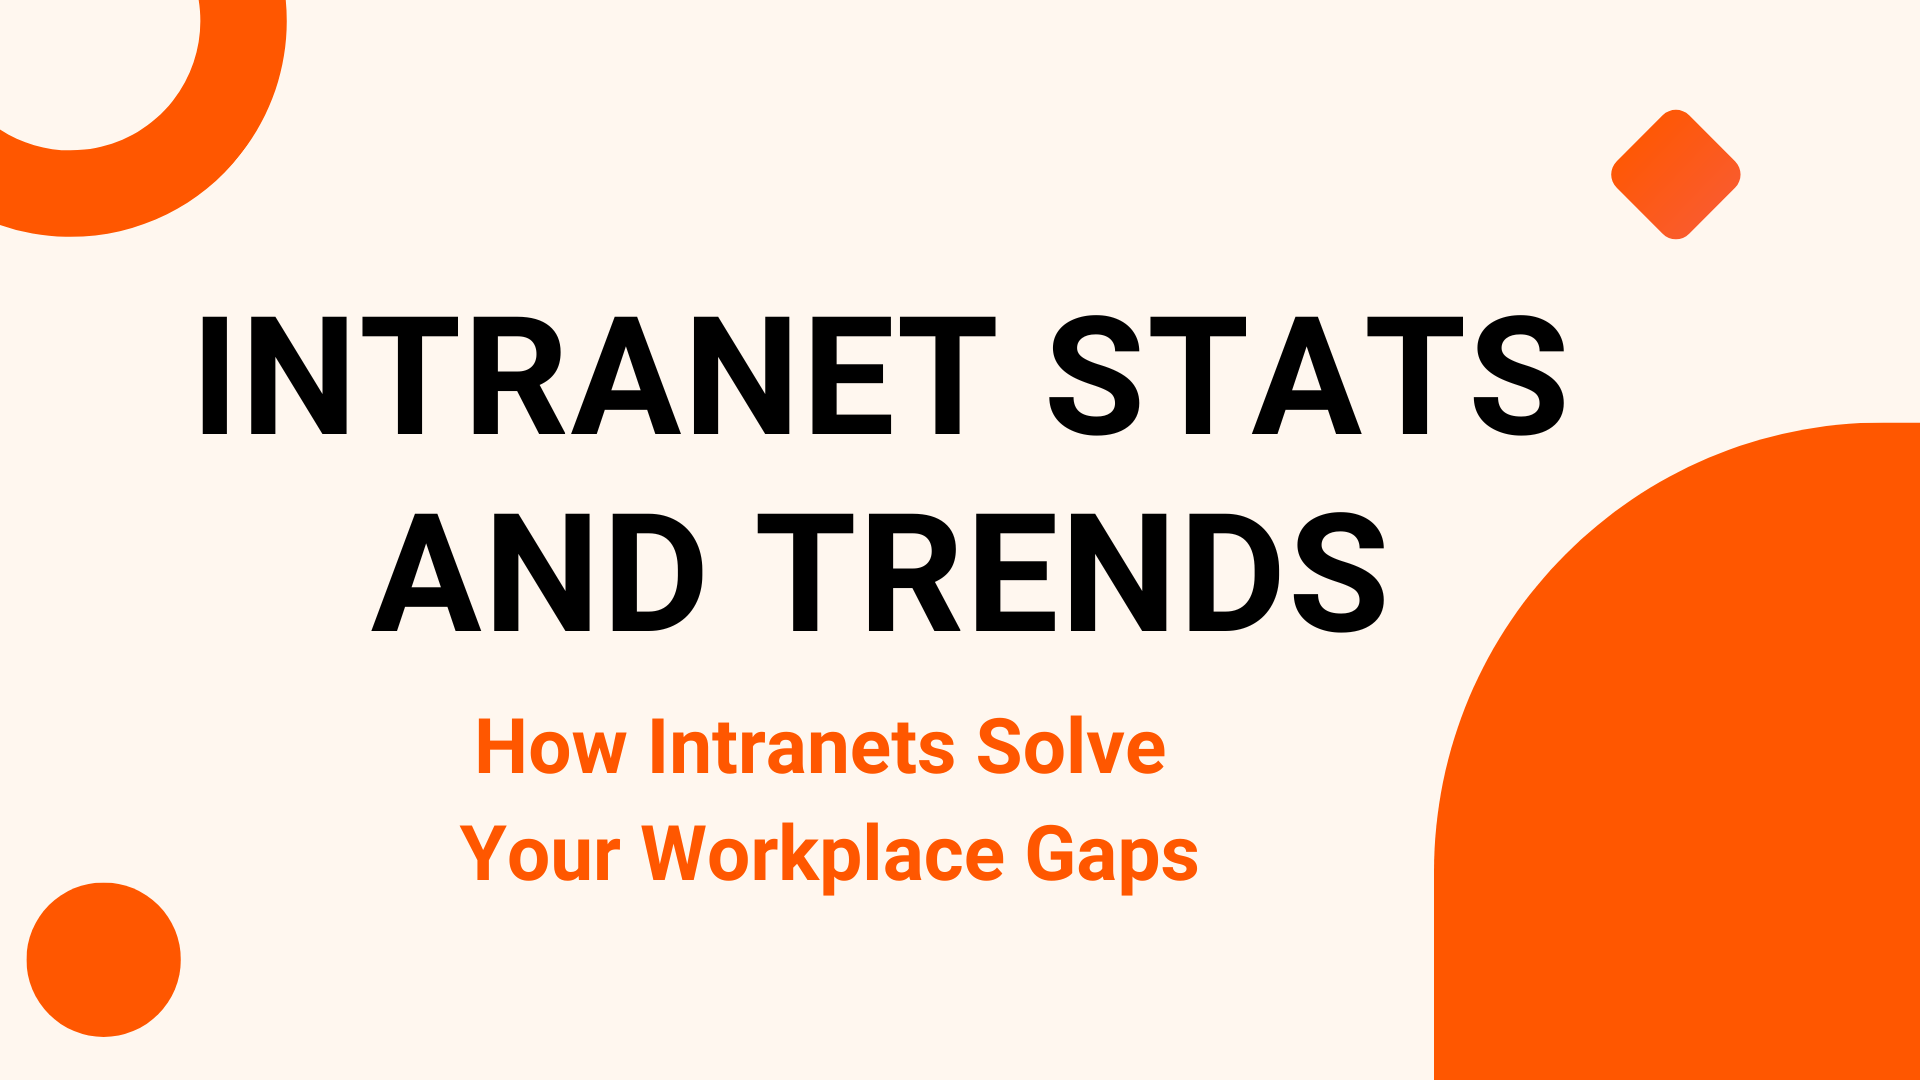 Intranet Stats and Trends: How Intranets Solve Your Workplace Gaps in 2023